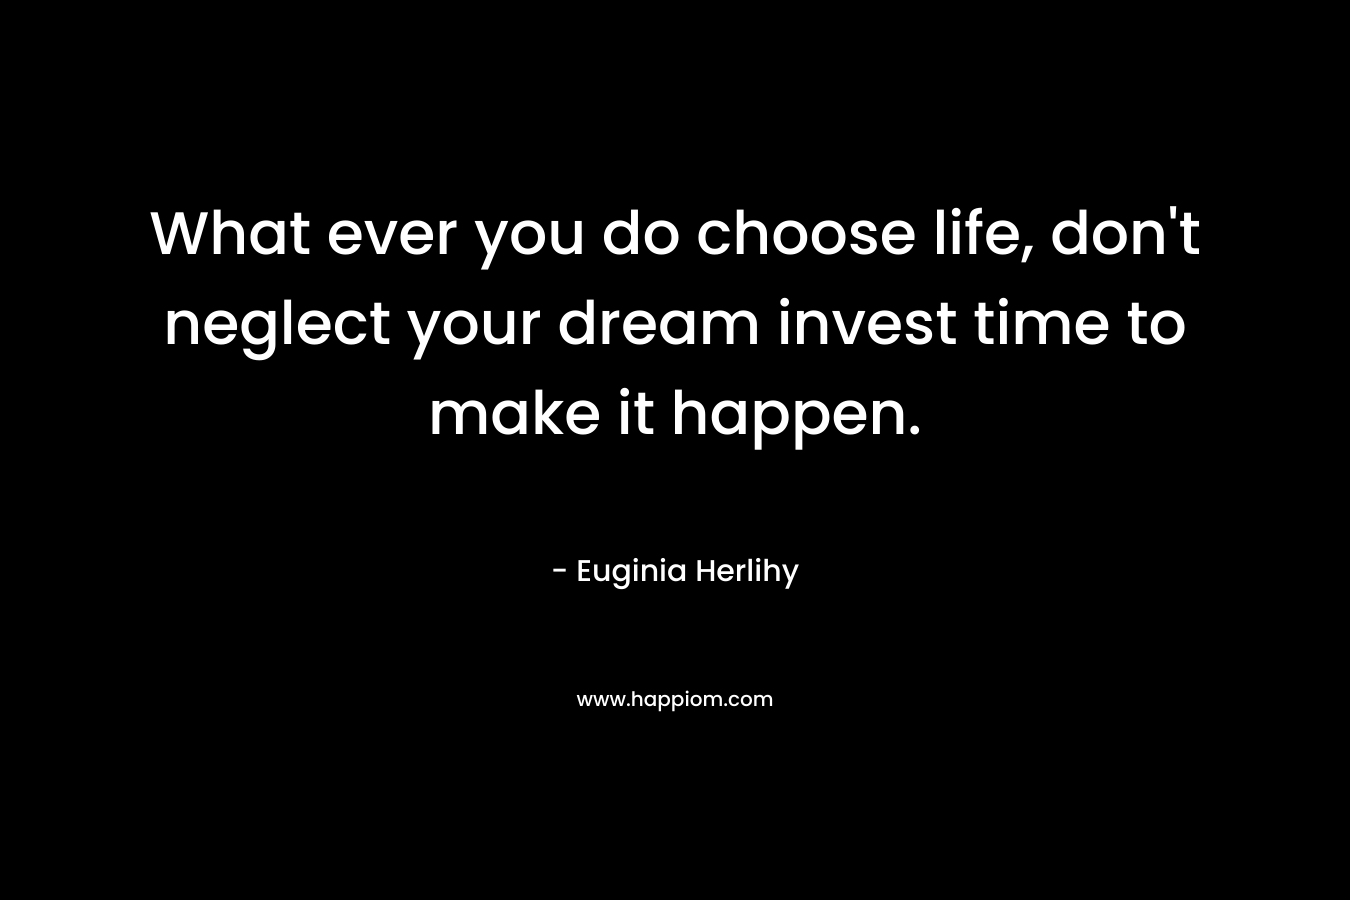 What ever you do choose life, don’t neglect your dream invest time to make it happen. – Euginia Herlihy